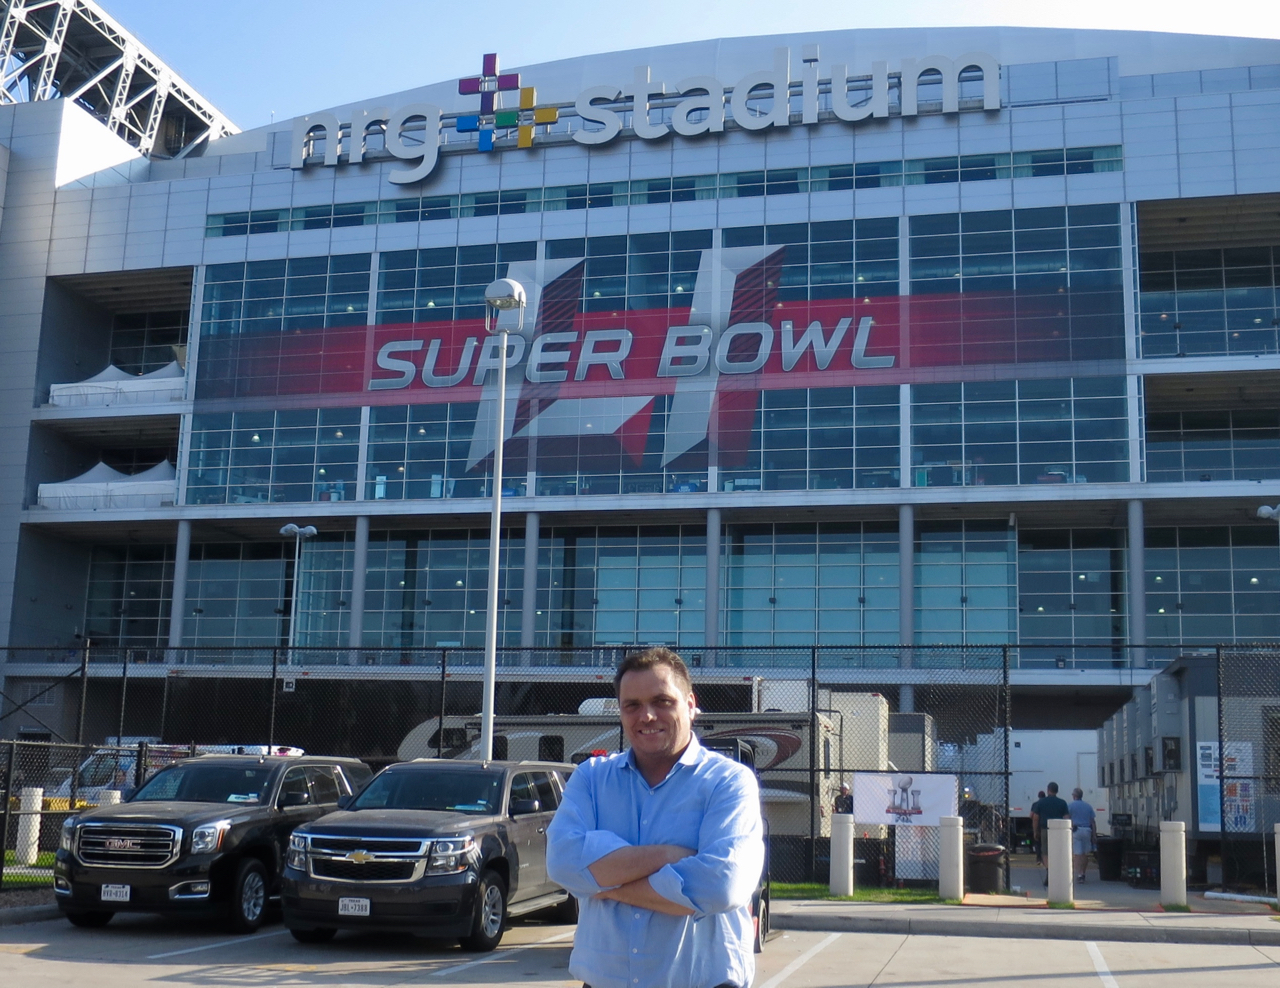 Mike Davies says Super Bowl planning is going well two days before the big game.